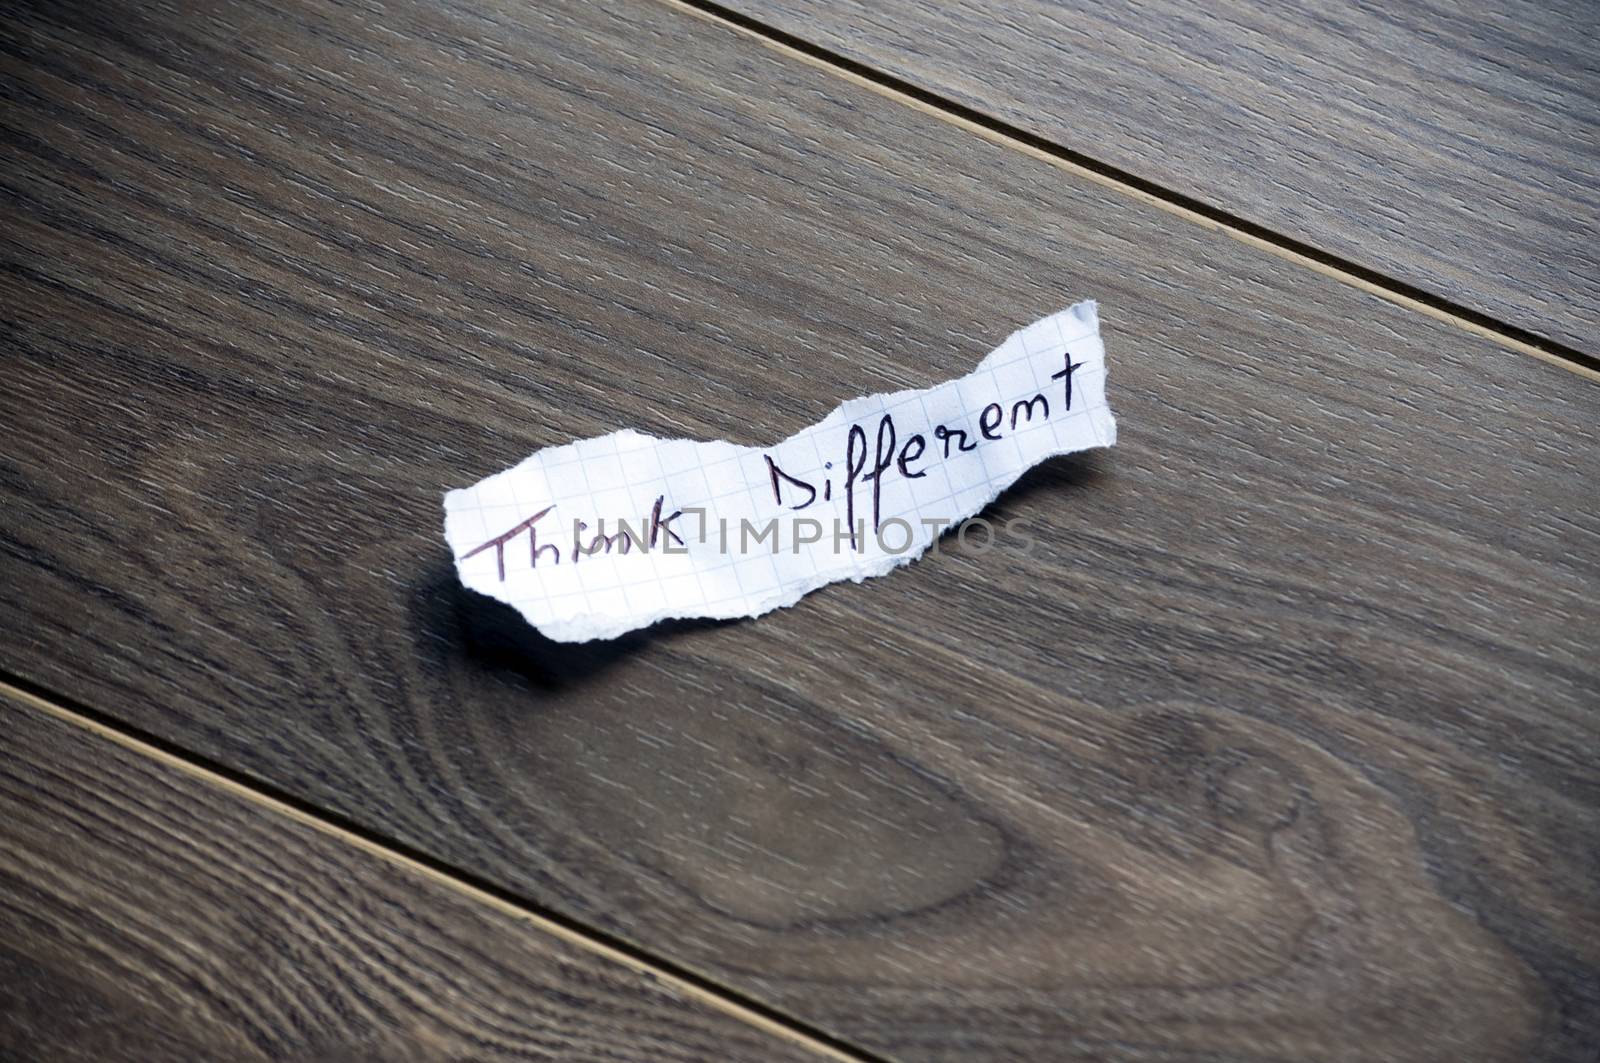 Think different written on piece of paper, on a wood background.